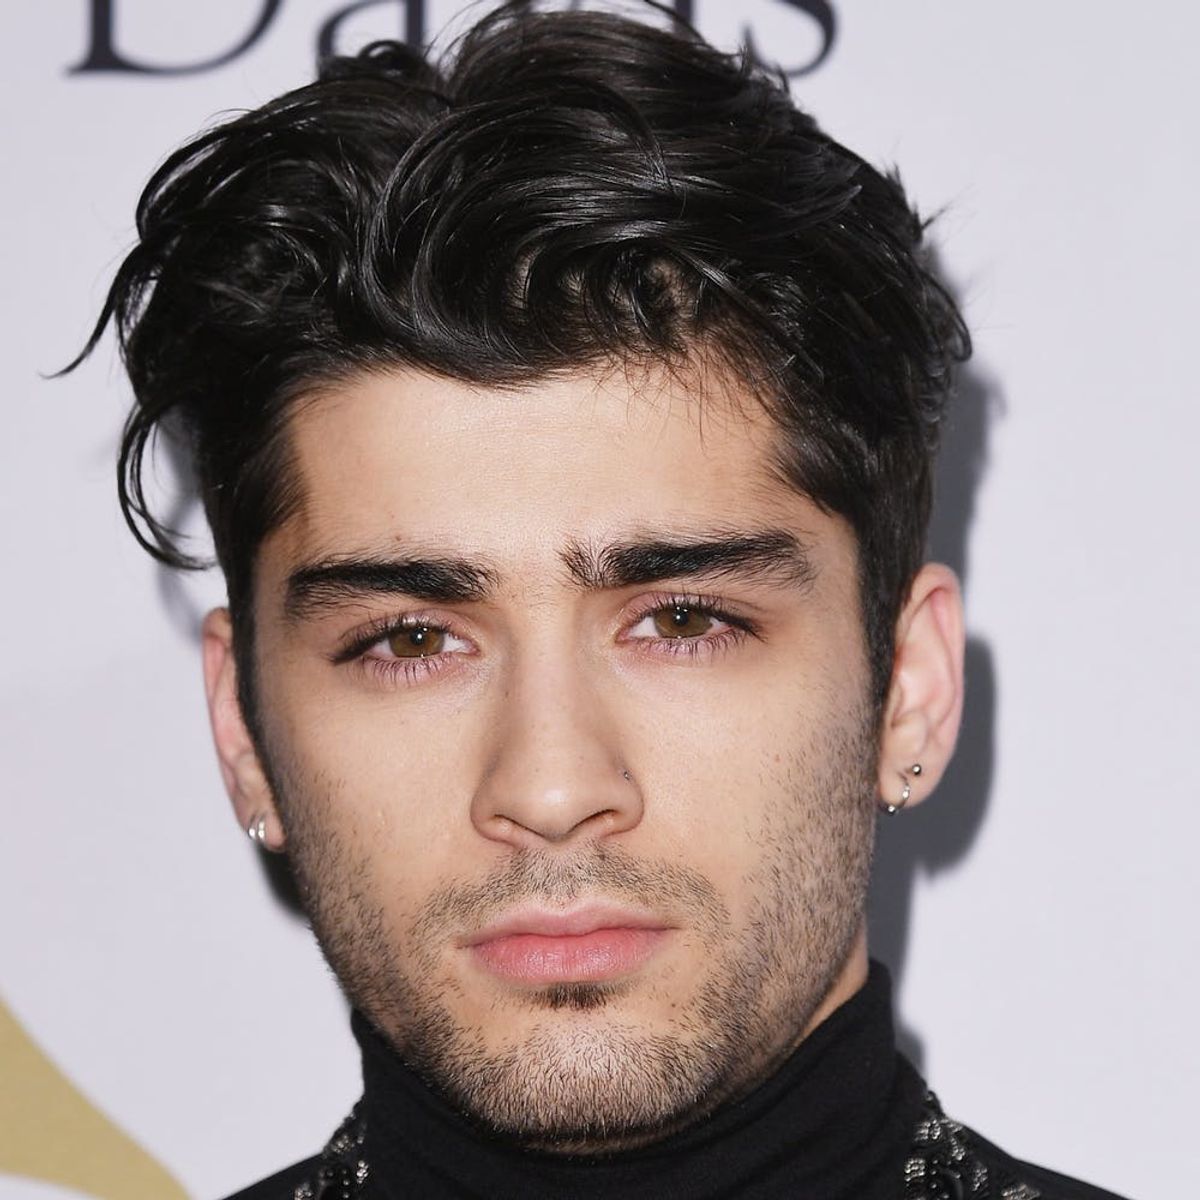 Zayn Malik Opens Up to Vogue About His Issues With Anxiety